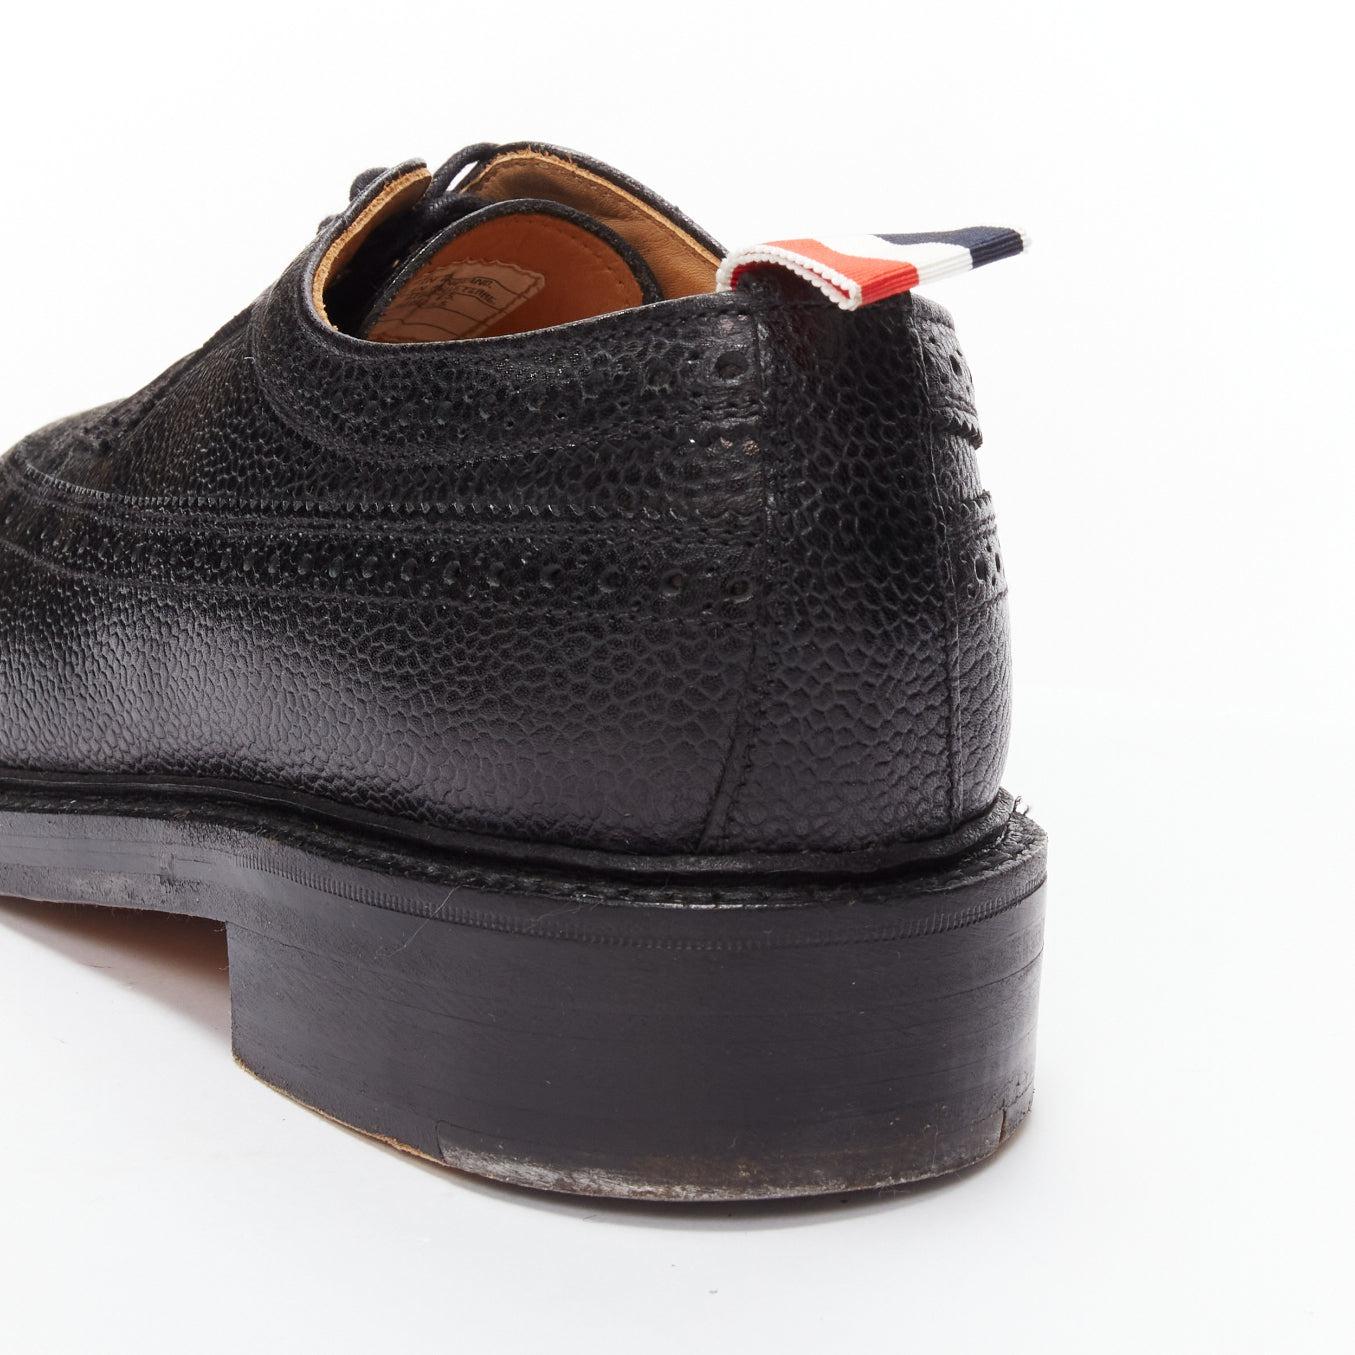 THOM BROWNE black grained leather perforated oxford brogue shoes EU42.5 For Sale 3